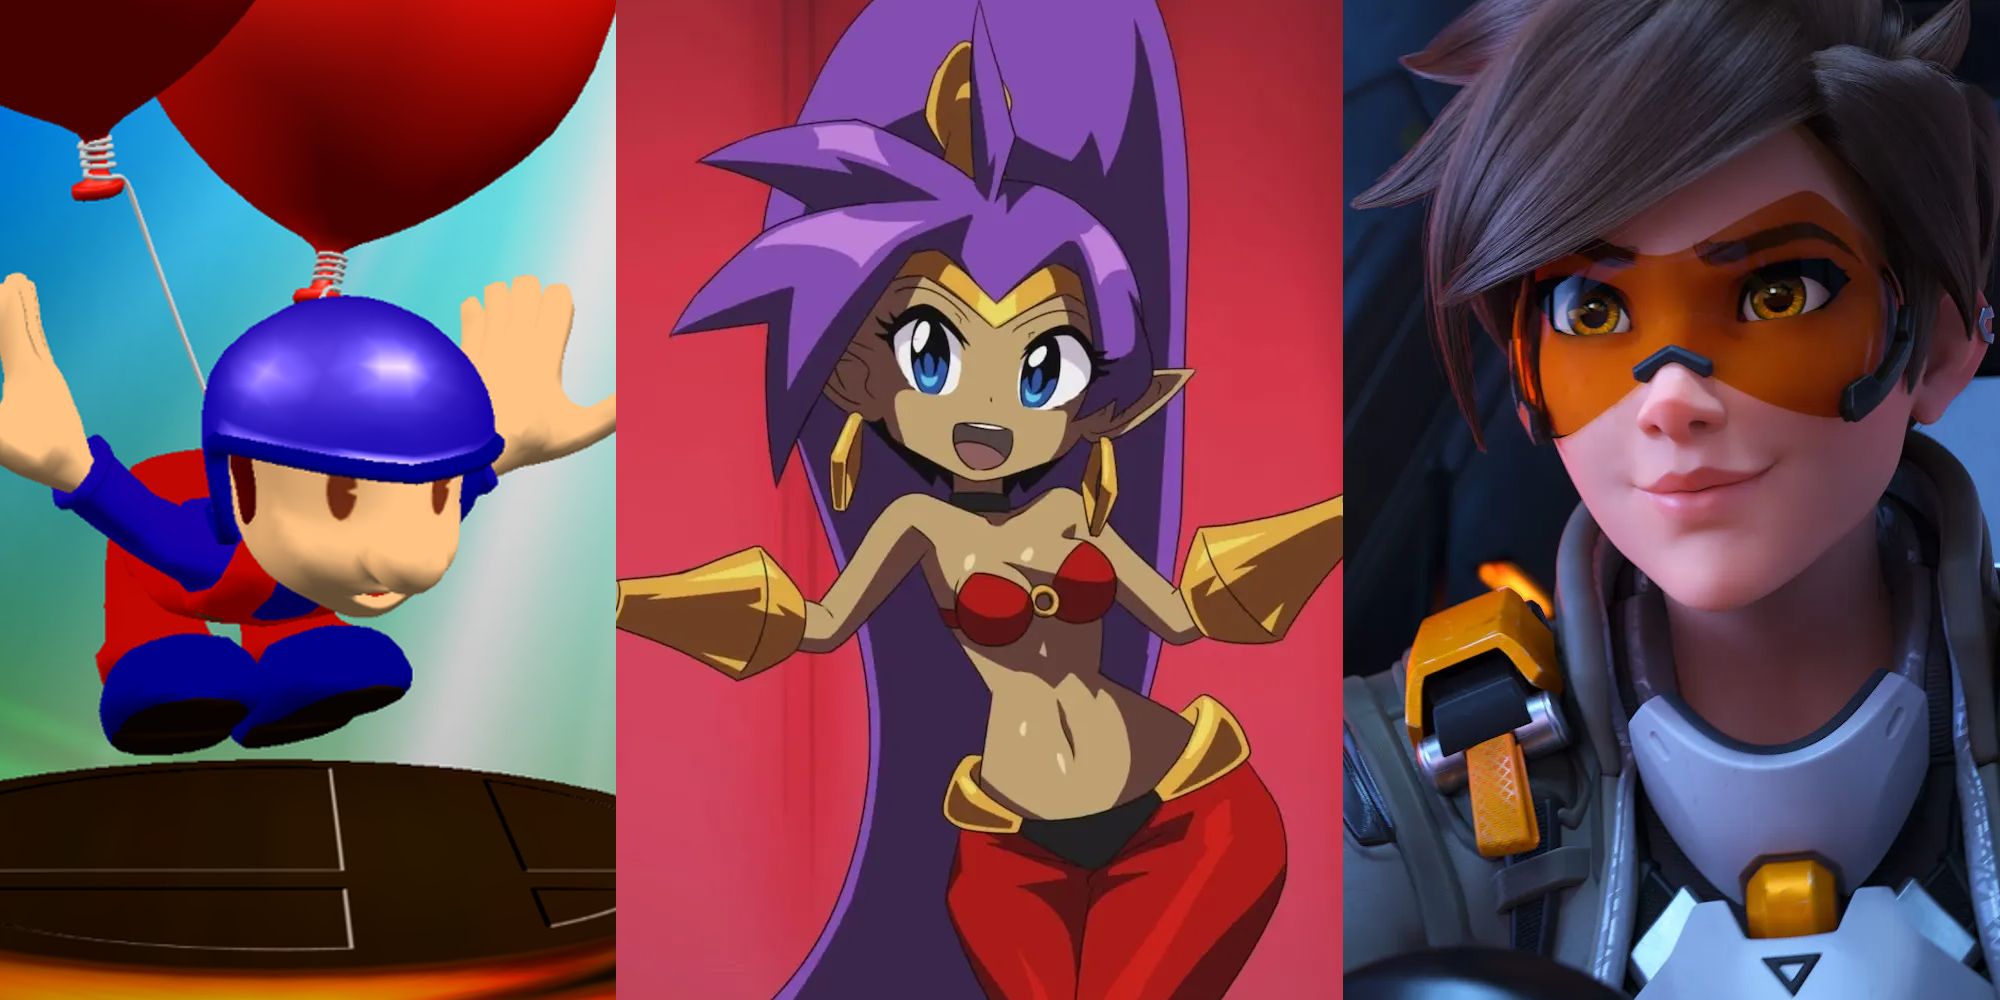 A Balloon Fighter trophy in Melee; Shantae in a cutscene from a Shantae game; Tracer in an animatic for Overwatch 2